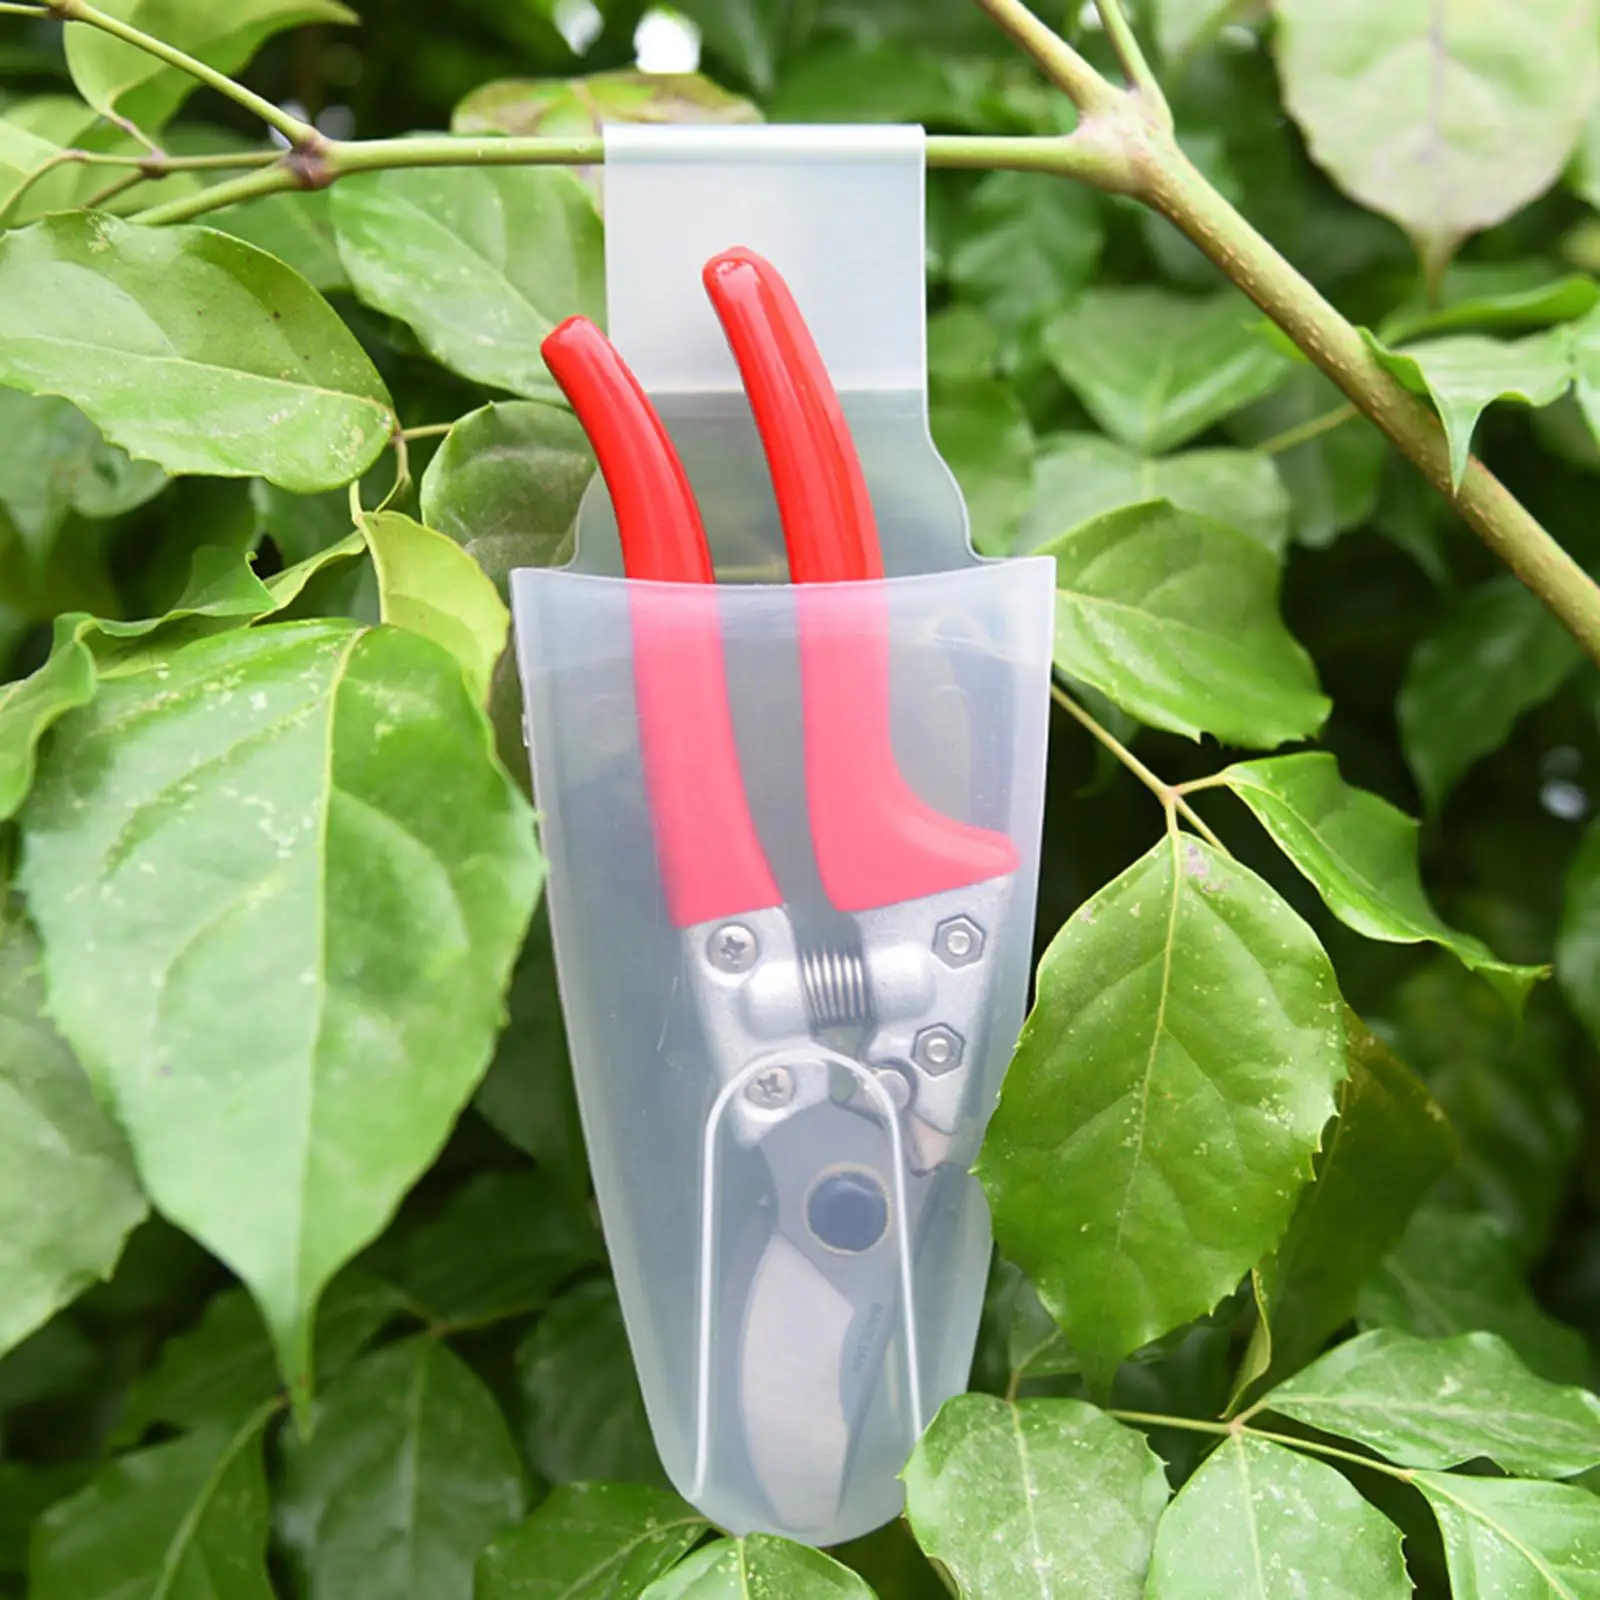  Clear Garden Hanging Case Home Jungle Portable Protective Case Plastic Shears Storage Box Pruning Organizer for Clippers 